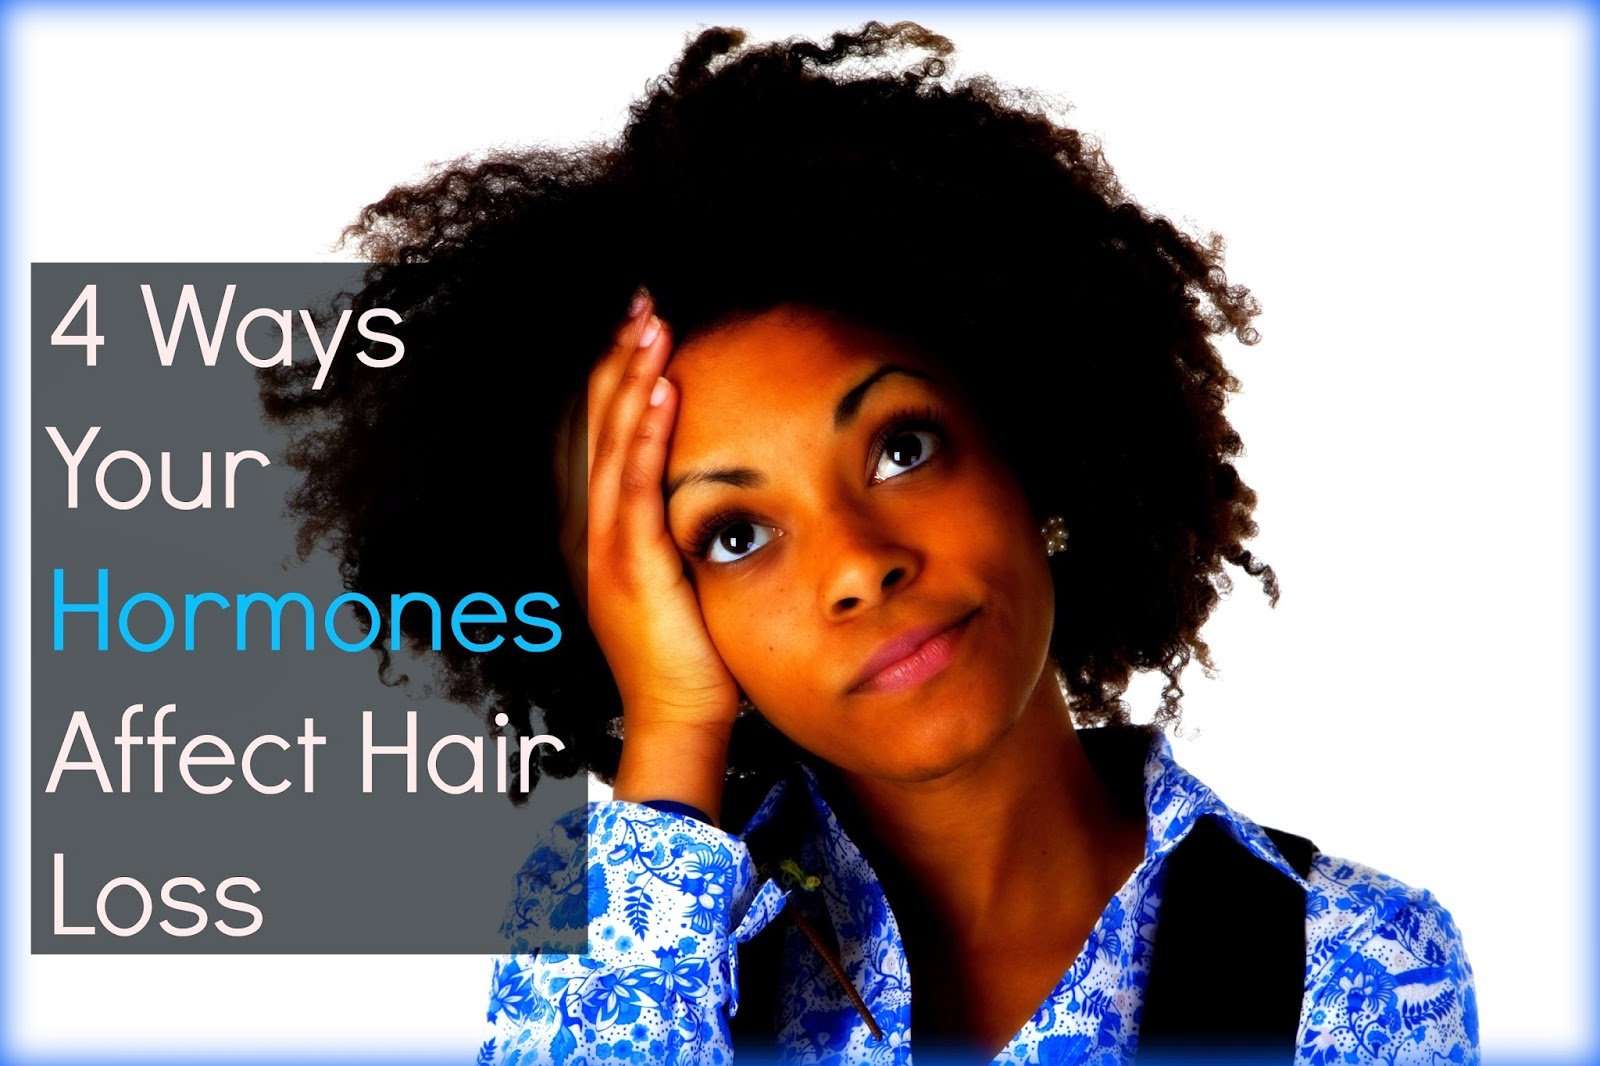 4 Ways Your Hormones Affect Hair Loss